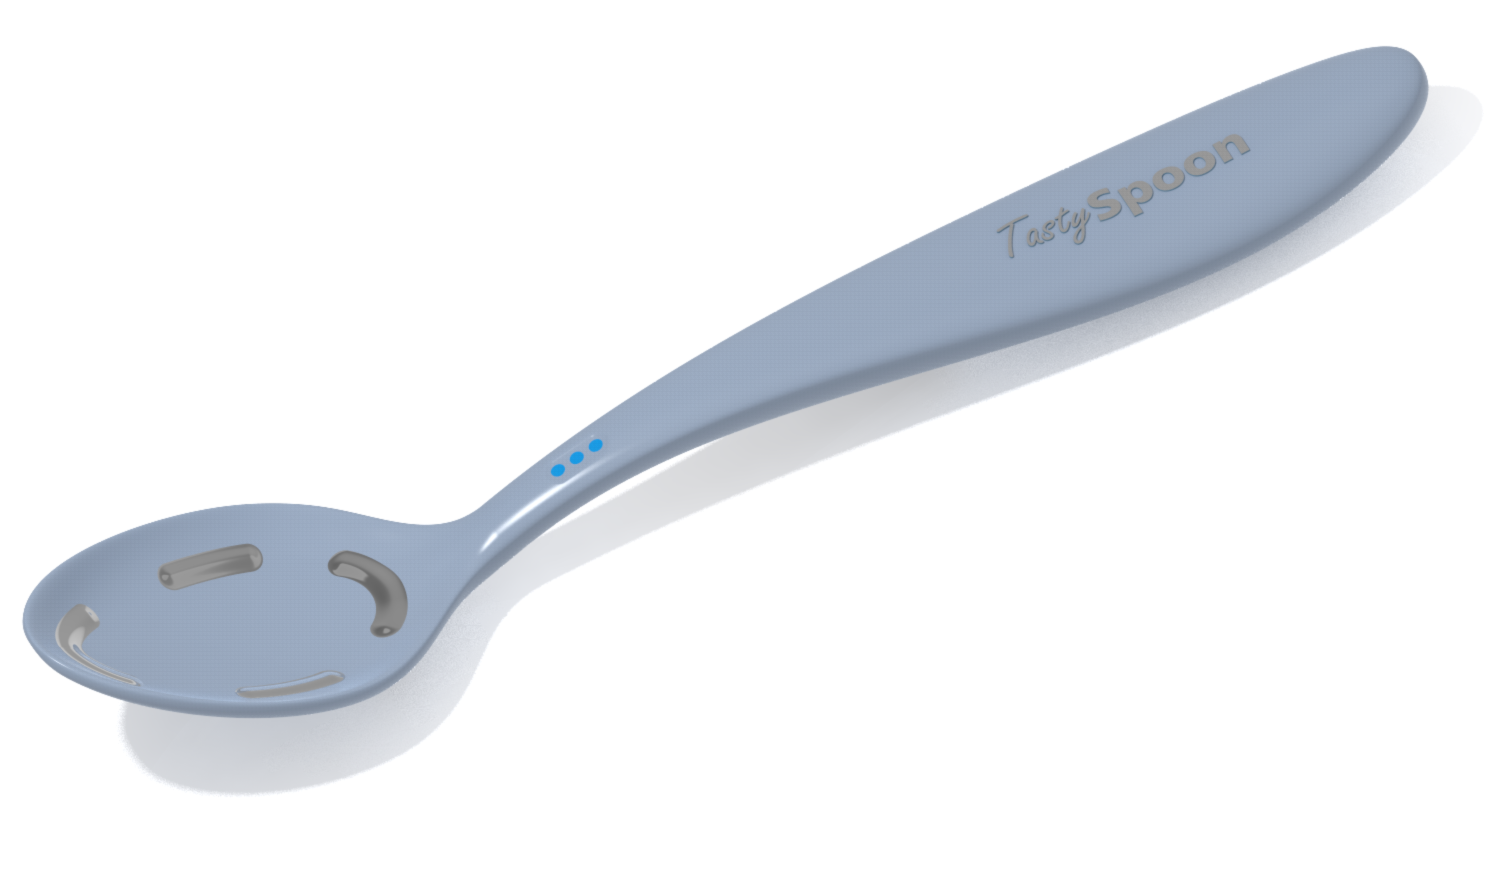 Computer-generated image of the prototype Tasty Spoon; a grey plastic spoon with visible sensory pads on the bowl of the spoon. 